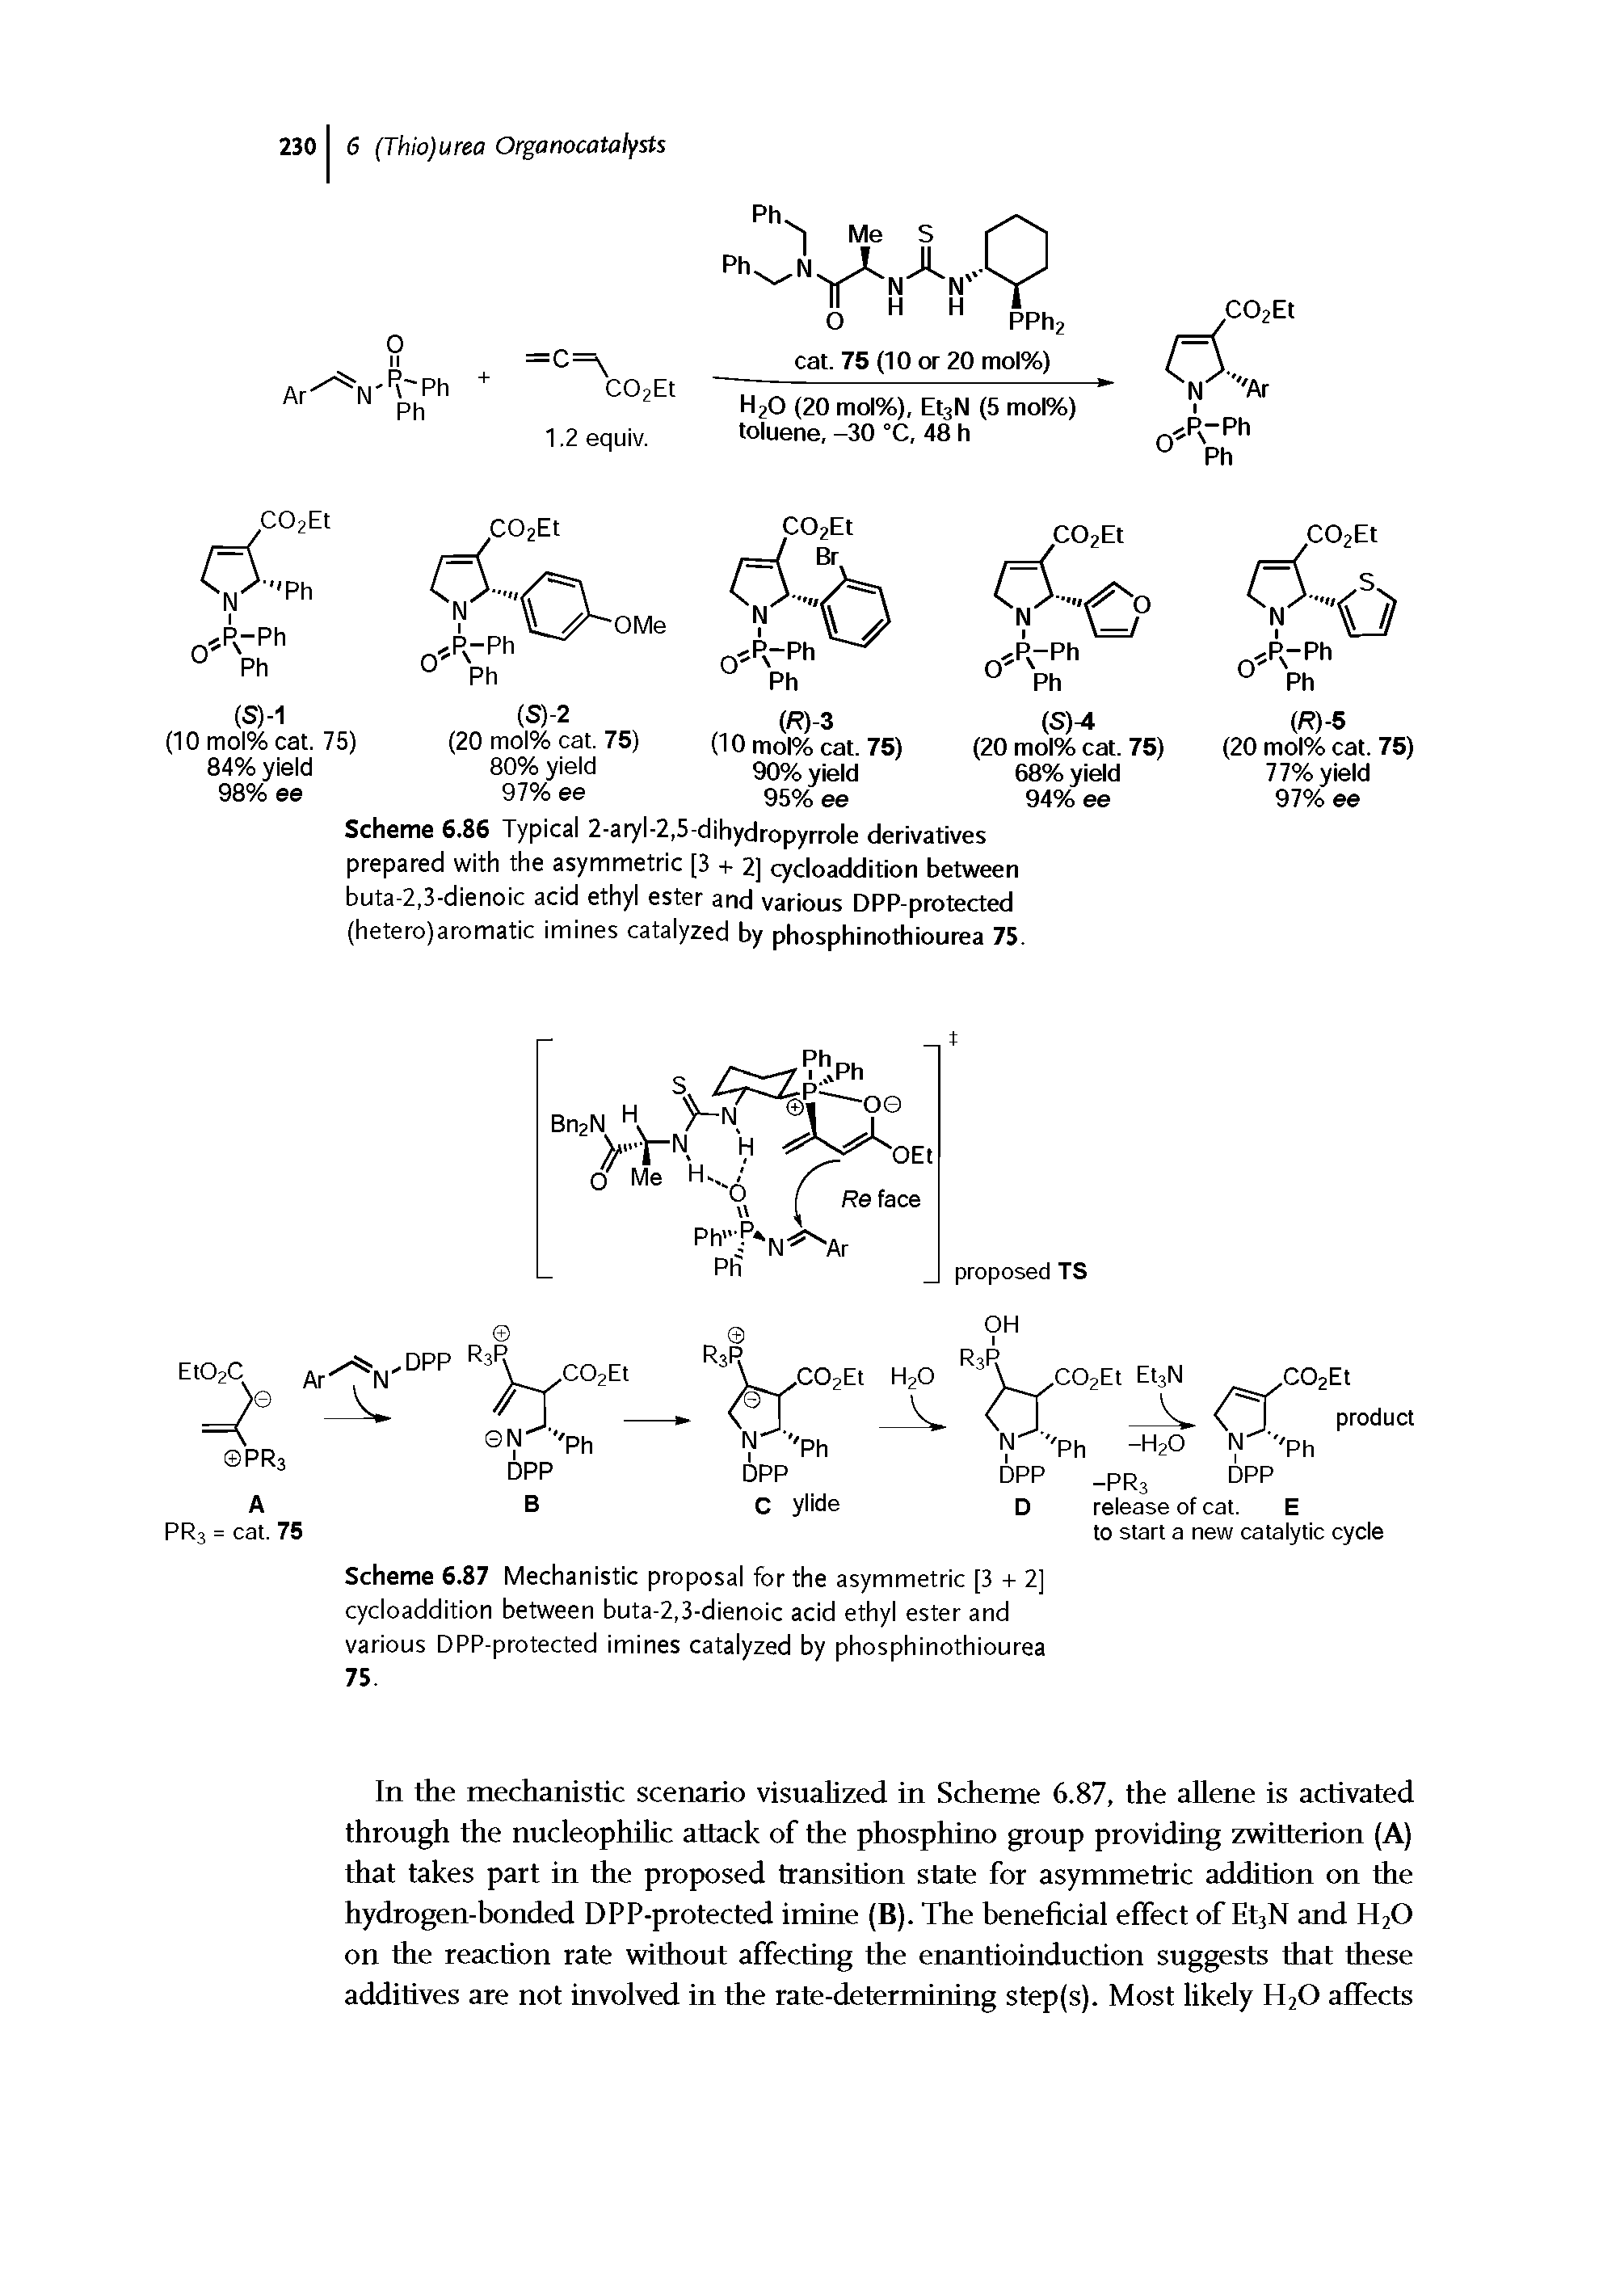 Scheme 6.86 Typical 2-aryl-2,5-dihydropyrrole derivatives prepared with the asymmetric [3 + 2] cycloaddition between buta-2,3-dienoic acid ethyl ester and various DPP-protected (hetero)aromatic imines catalyzed by phosphinothiourea 75.